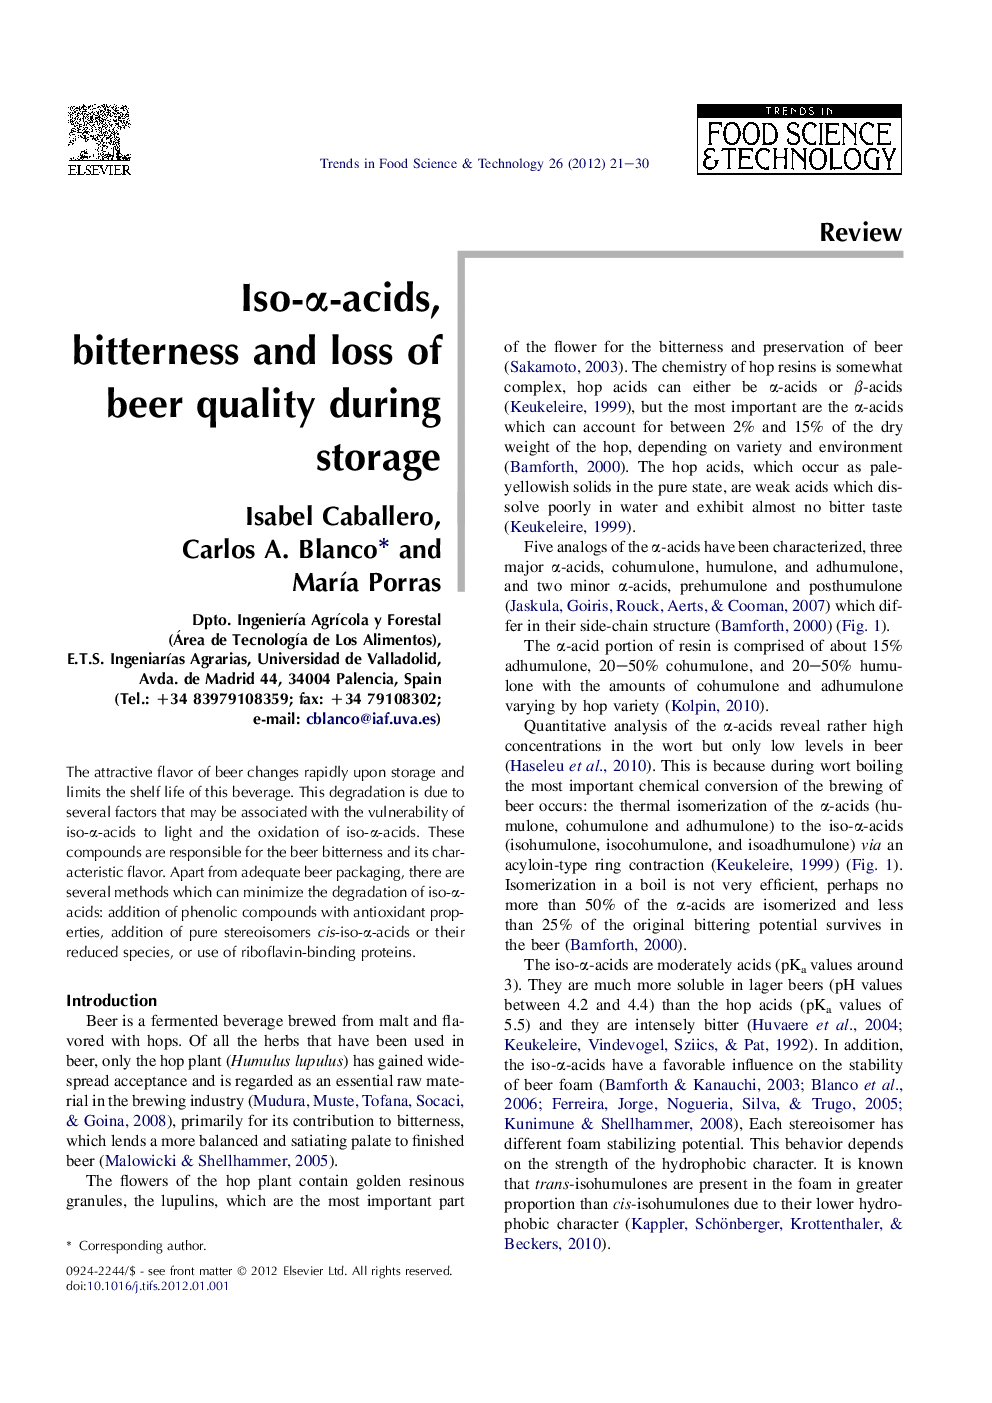 Iso-α-acids, bitterness and loss of beer quality during storage